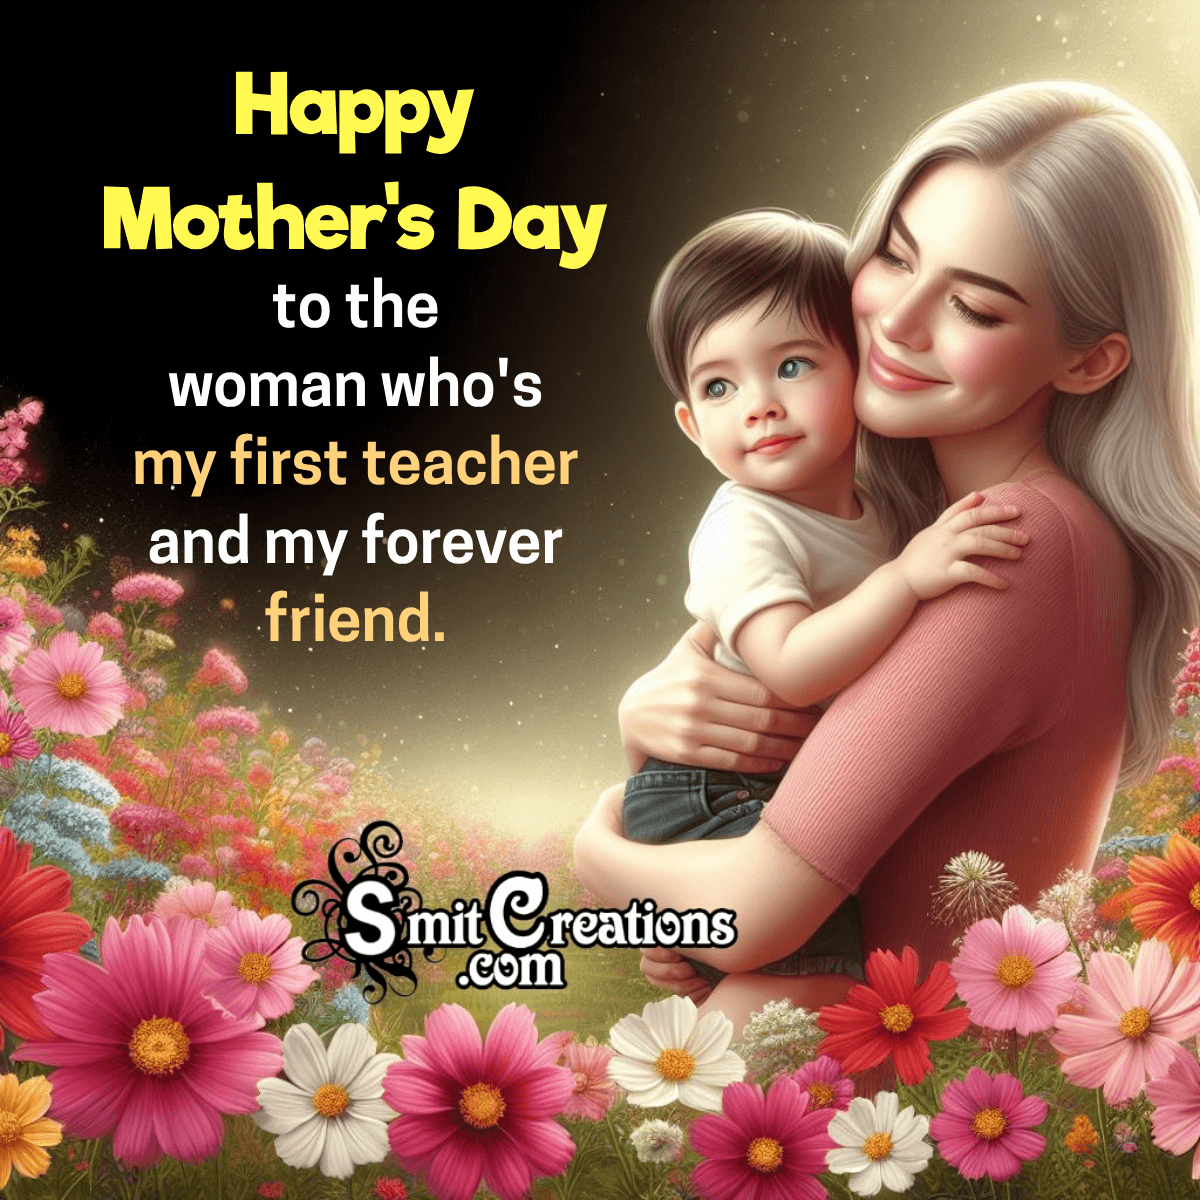 Happy Mother’s Day Best Wishing Image